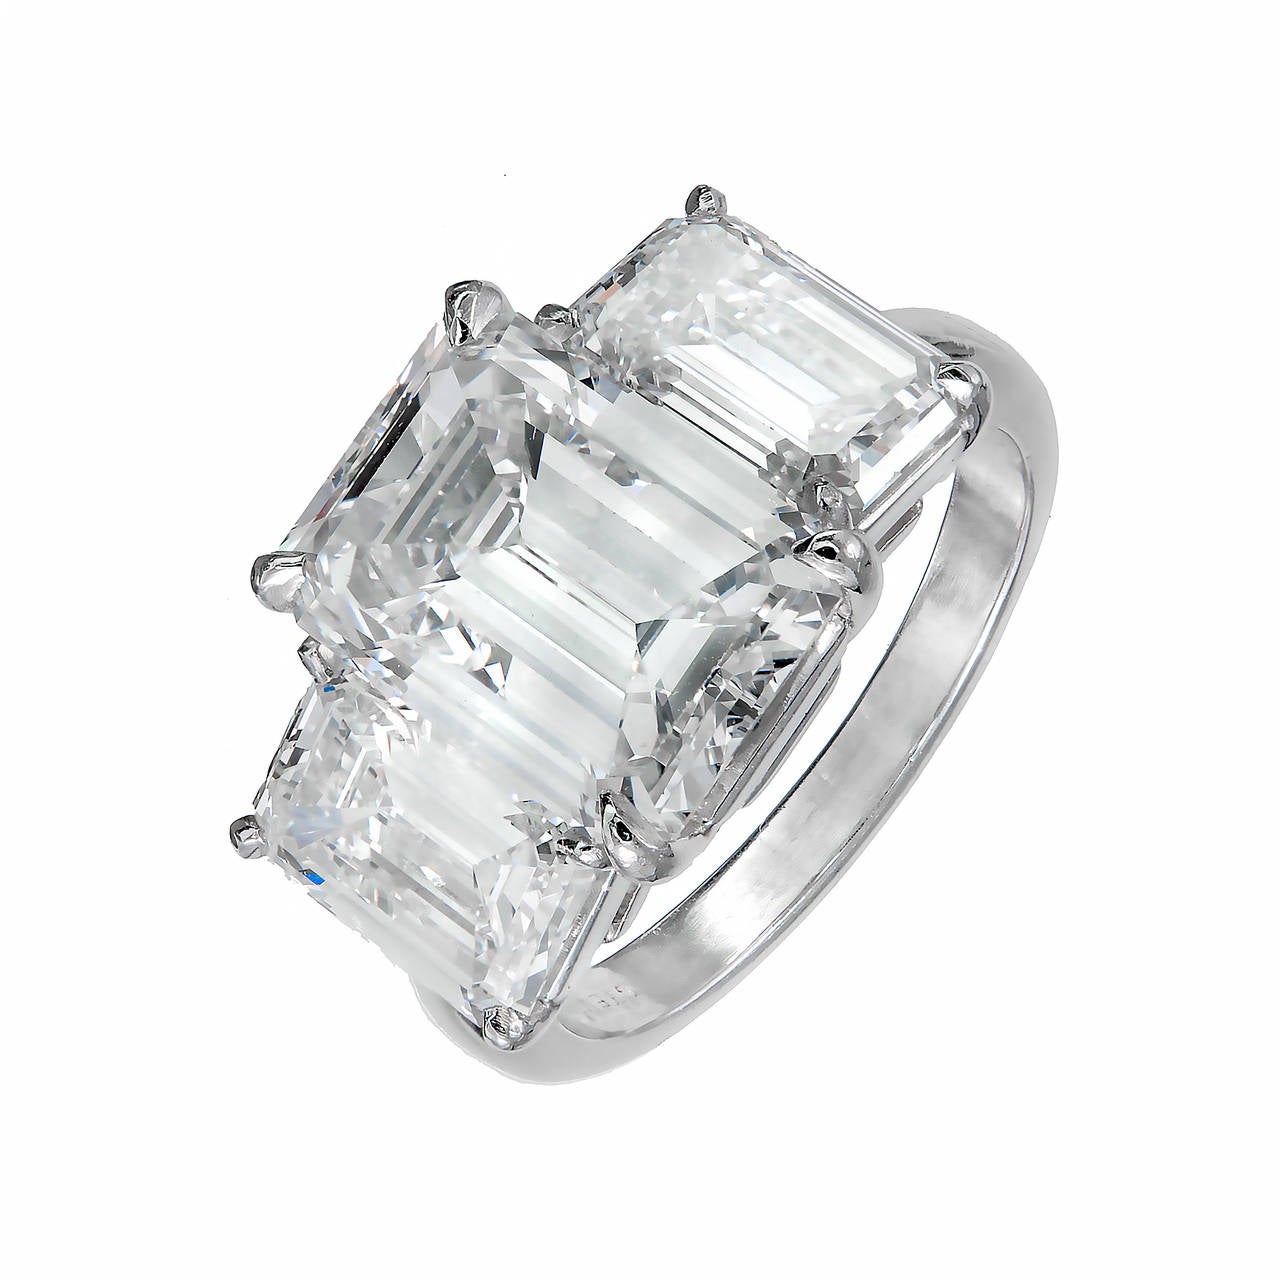 Important handmade Platinum ring set with three crystal clear extra sparkly Emerald cut diamonds. Well matched and unusually brilliant for Emerald cuts. Fresh GIA certificates.

1 Emerald cut diamond, approx. total weight 5.02cts, H, SI1, GIA